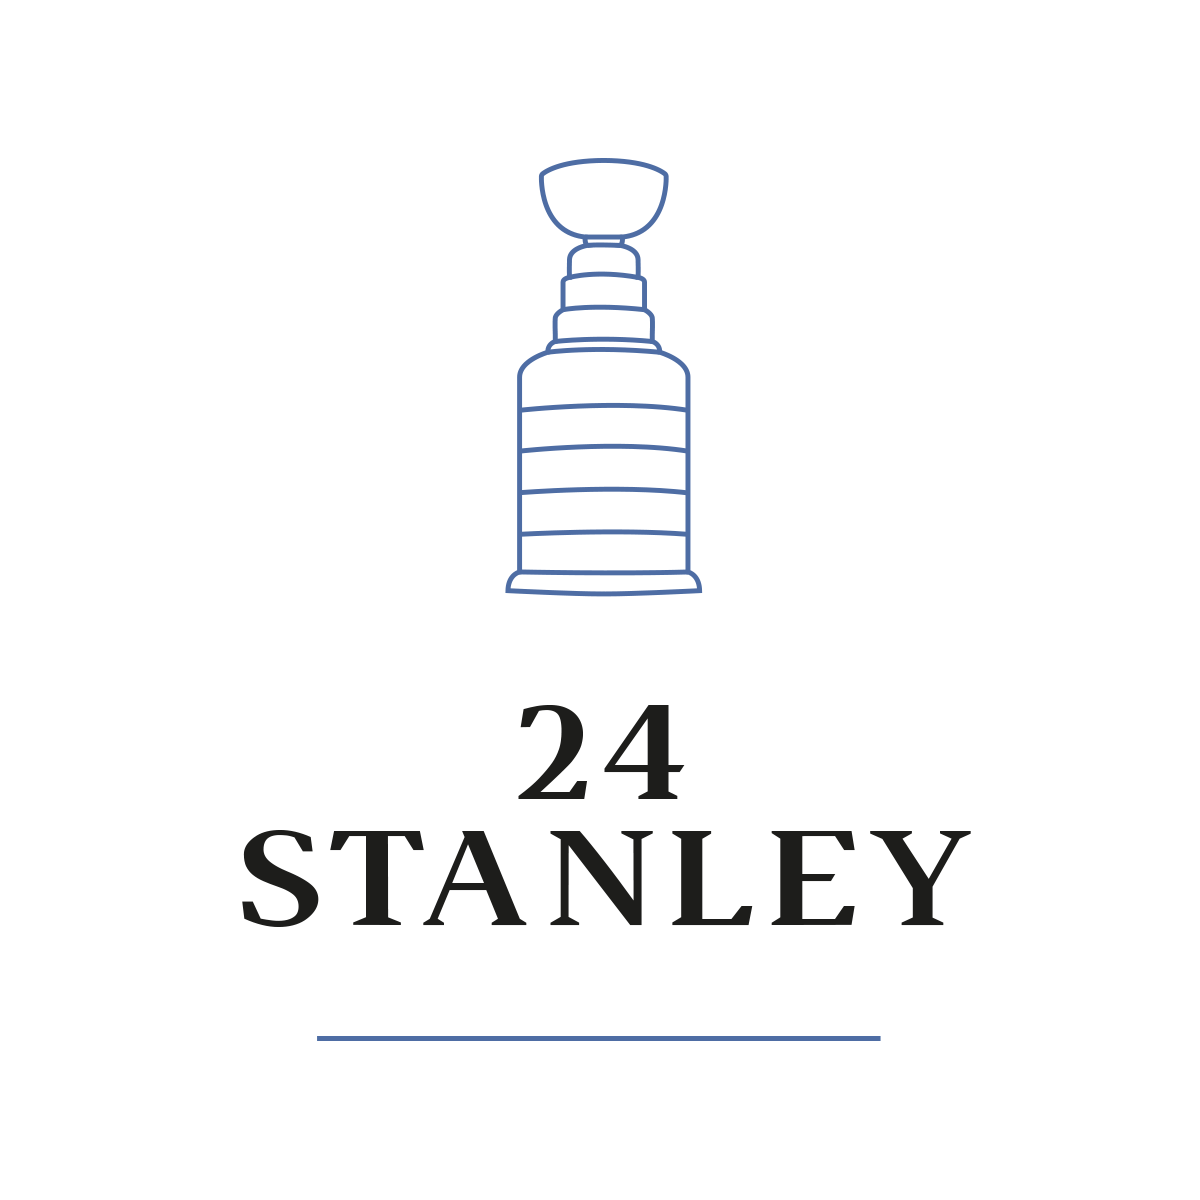 24_stanley-1.png